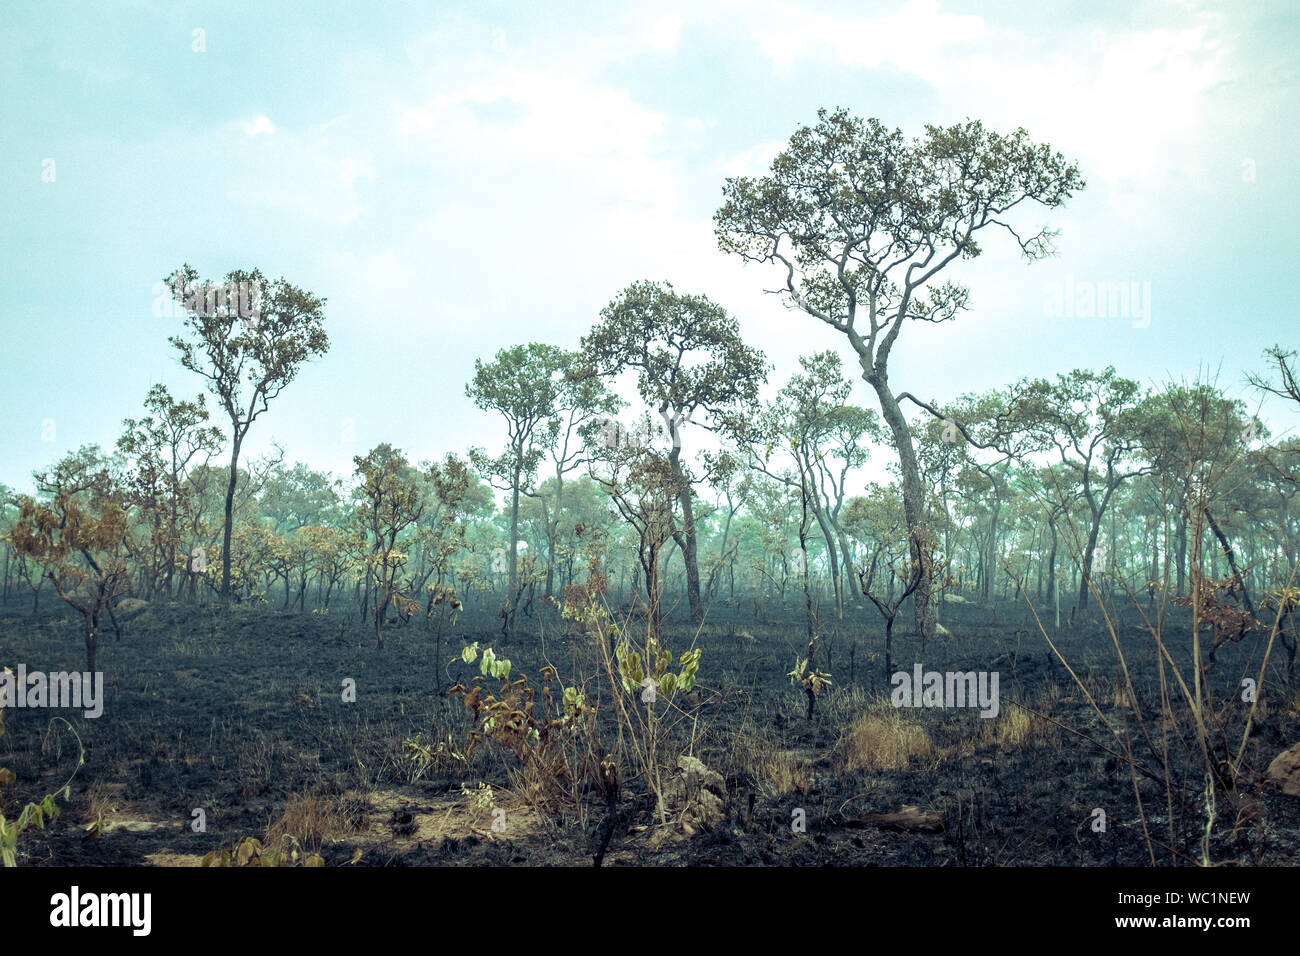 Græder alligevel kubiske Burnt Down Amazon Tropical Rain Forest, Richest Ecosystem on Earth Destroyed  to Ashes for Cow Grazing and Soya Crops Stock Photo - Alamy